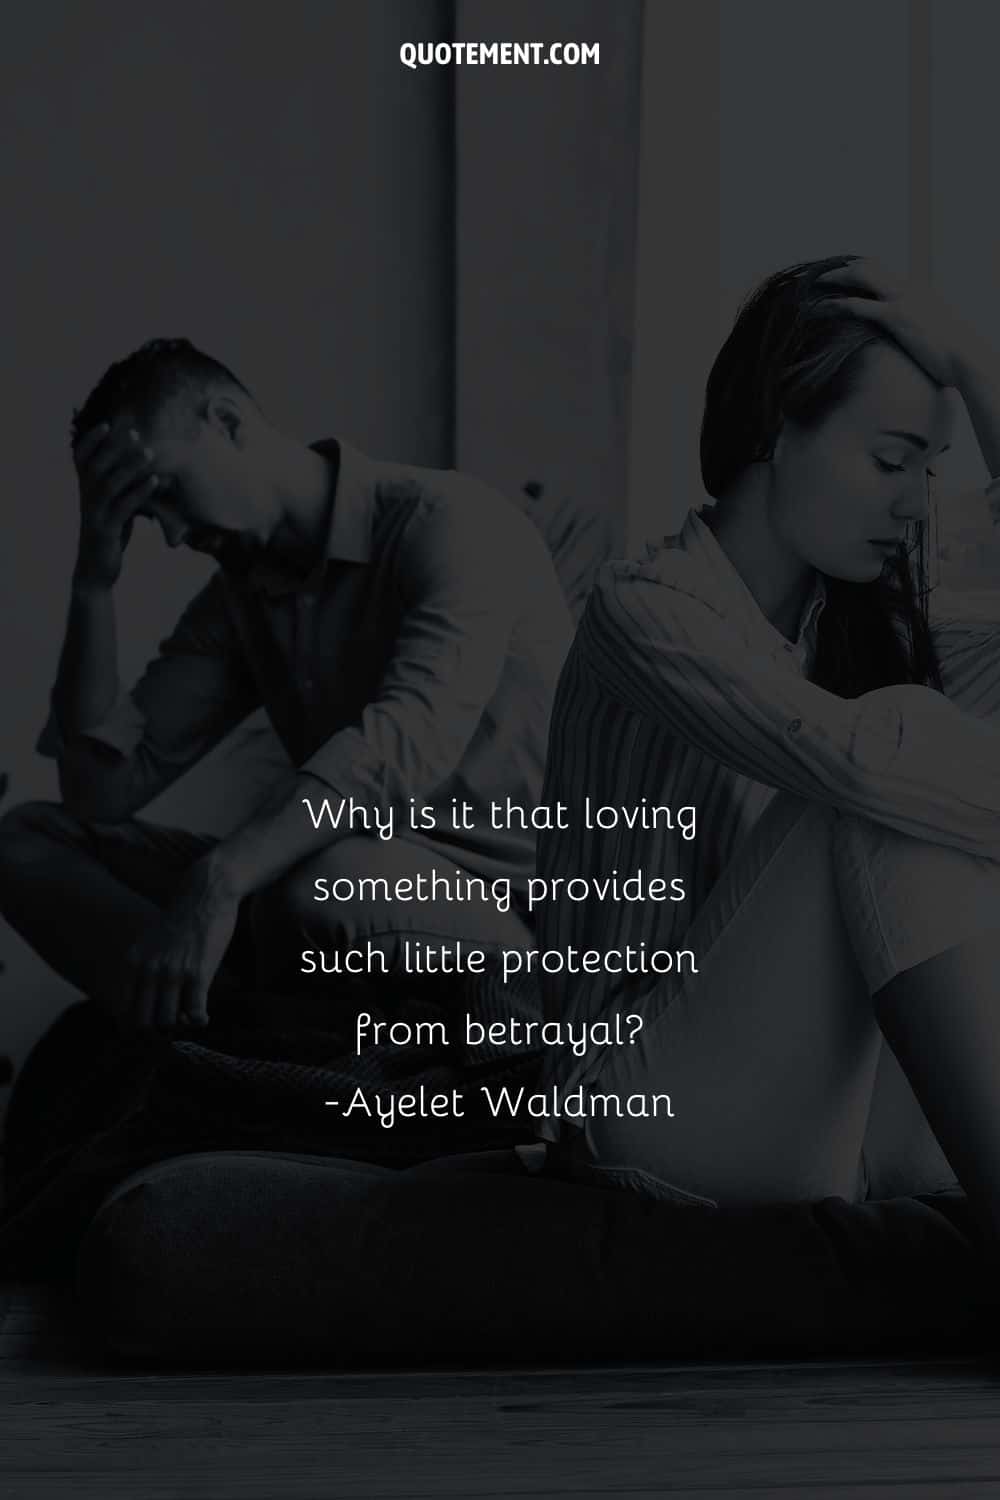 Why is it that loving something provides such little protection from betrayal